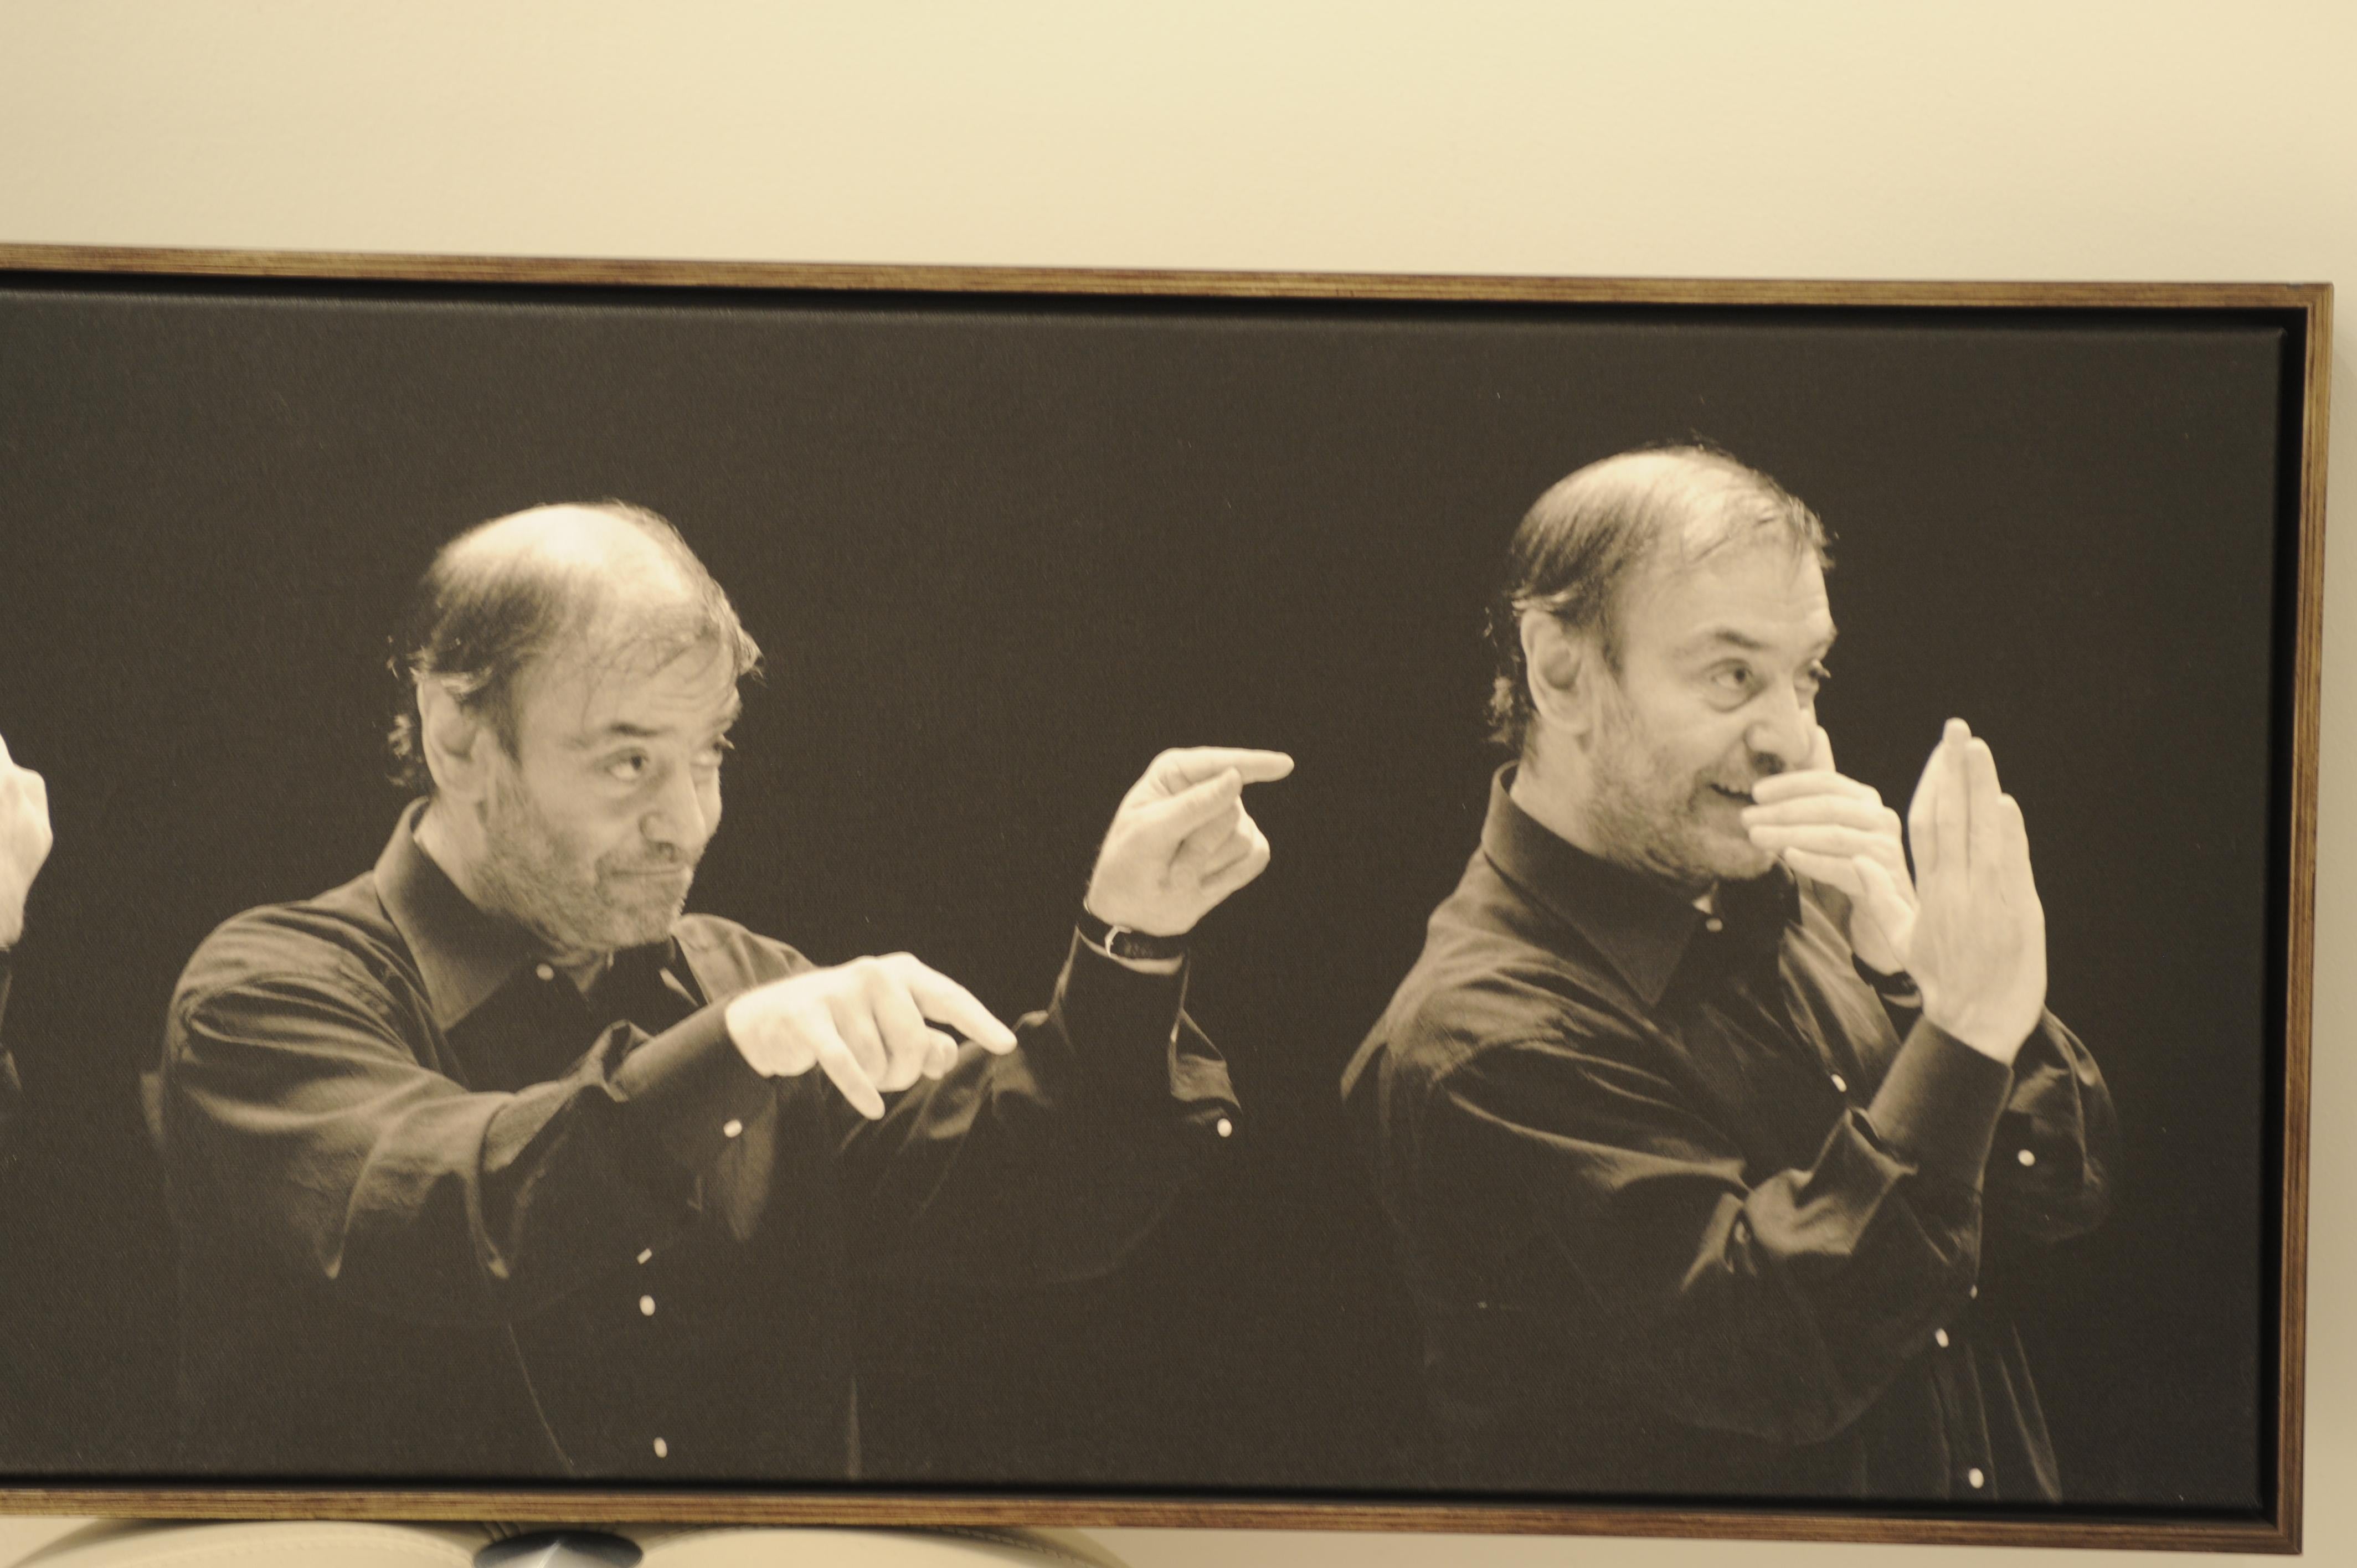 The famous conductor Valery Gergiev
Photo Art by Jeanette Handler, ca. 103 x 37,5 cm
Very good condition, framed on wood
Purchased at the Viennese auction house 'Im Kinsky' some ten years ago! (Was checked by the expert!)